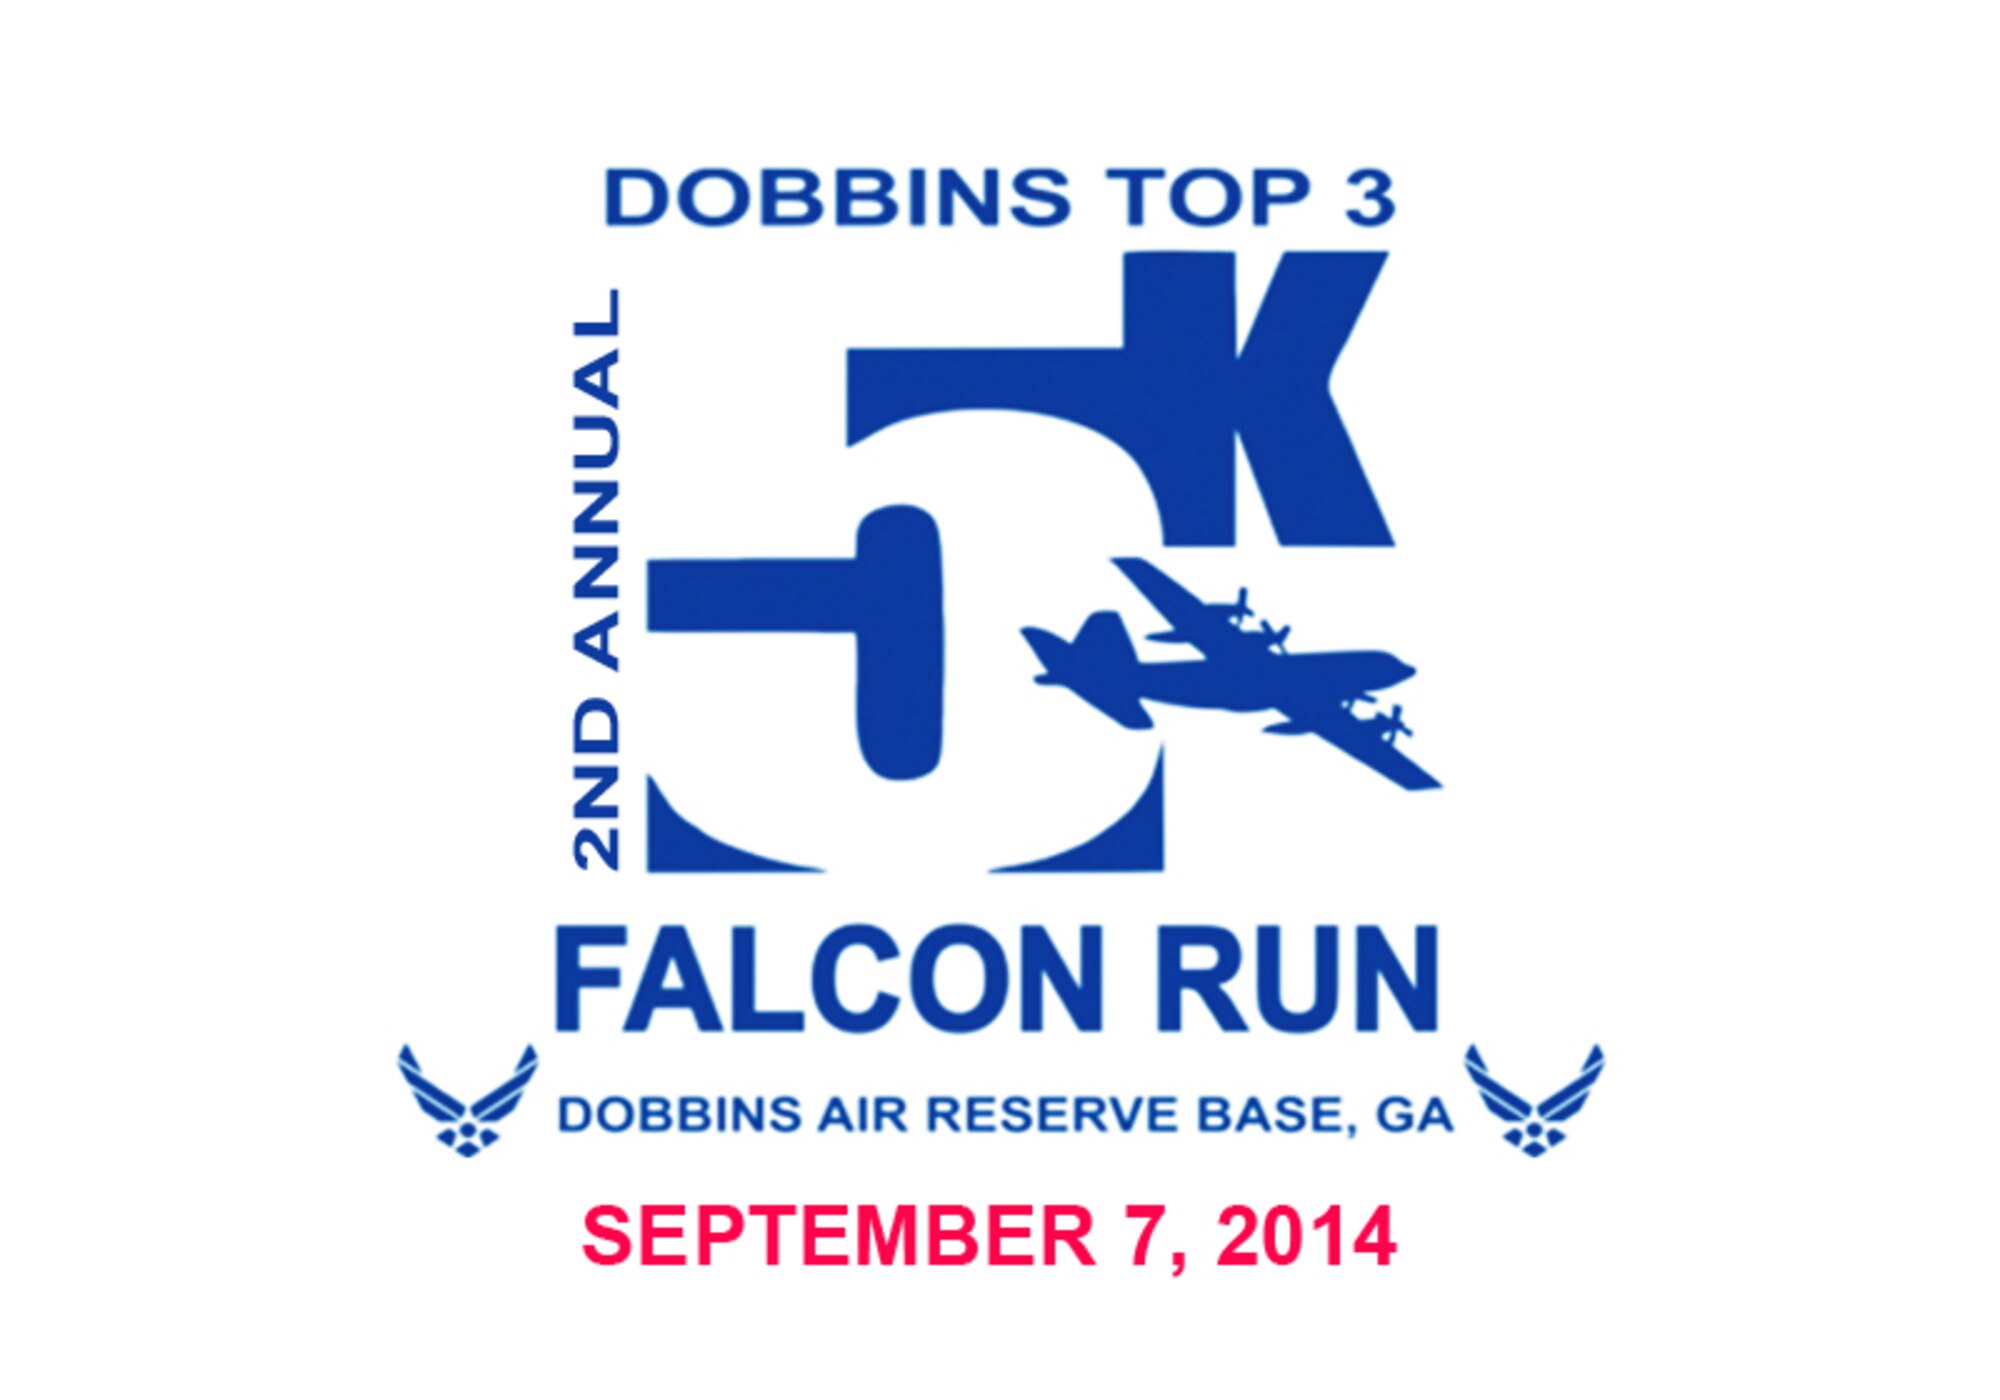 94th Airlift Wing members are encouraged to register and participate in the second annual Falcon 5K, a five kilometer fun-run Sept. 7, 2014. Sponsored by the Dobbins Top 3, proceeds from the event go to the Dobbins Emergency Fund used for assisting Airmen in times of need. (Courtesy image)